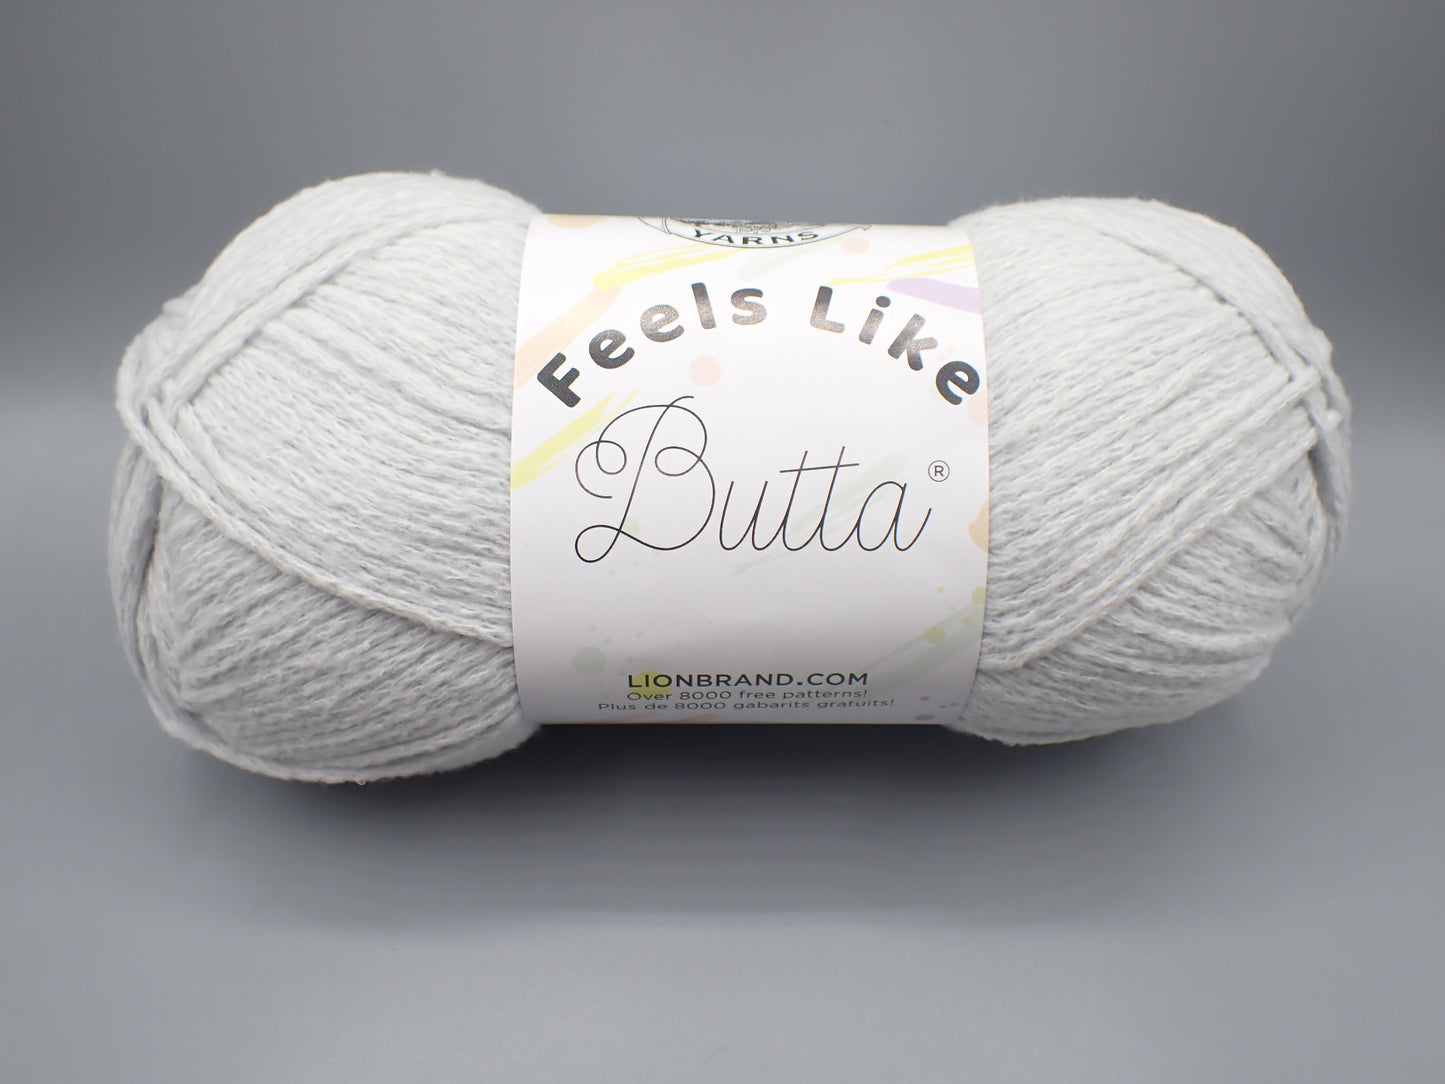 Lion Brand Yarns Worsted weight Feels Like Butta Pale Grey